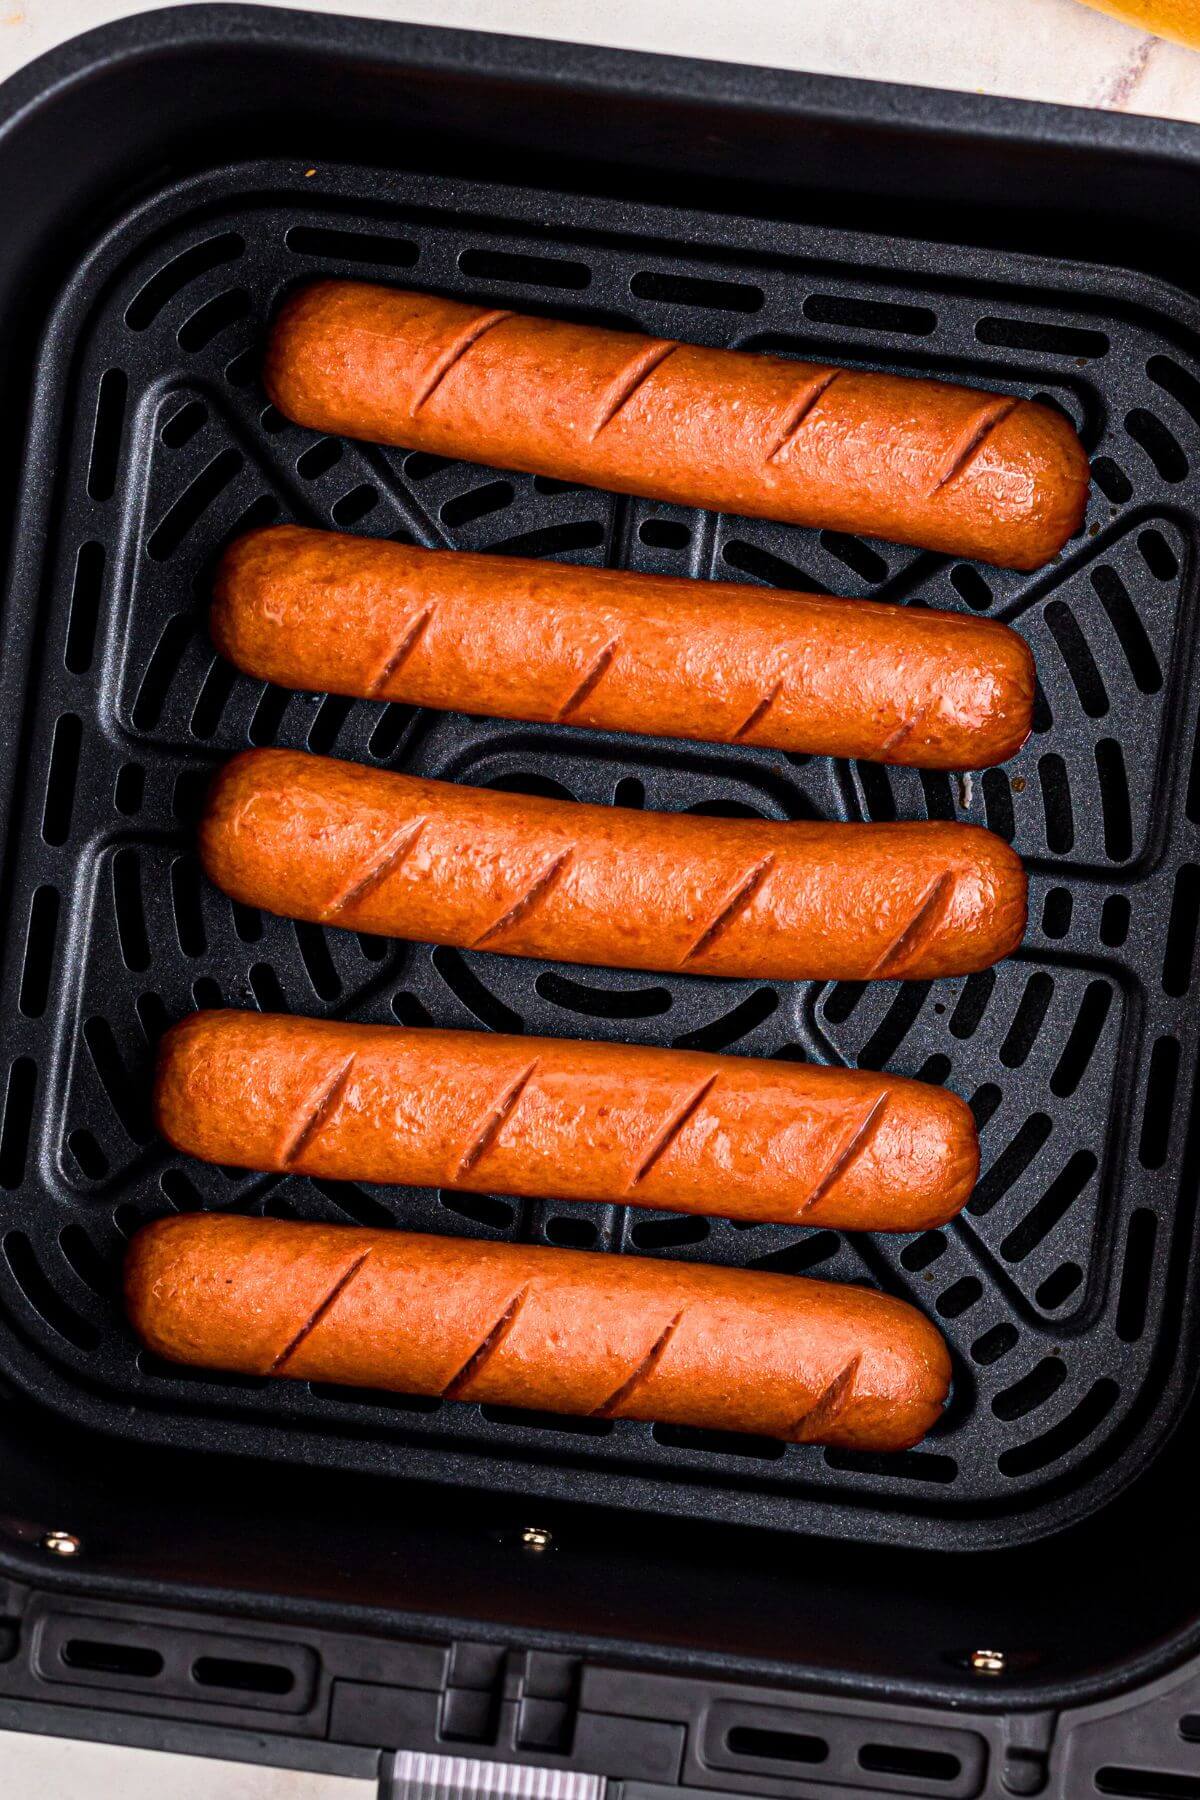 Juicy brown hot dogs in the air fryer basket after being cooked. 